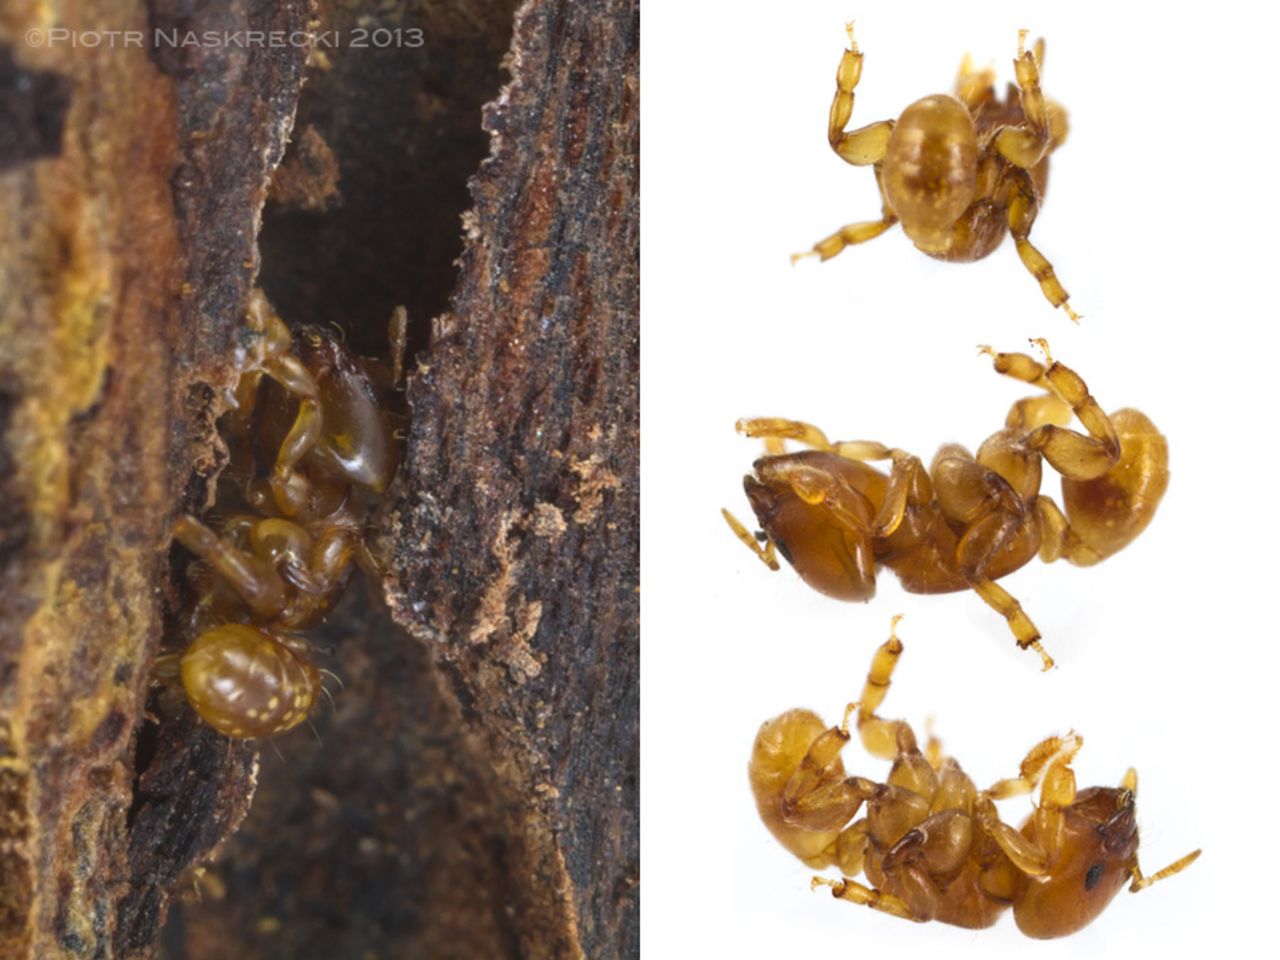 Melissotarsus emeryi is the world's only ant incapable of walking on flat surfaces. This species spends its life inside narrow passage deep in the wood of trees and can only move by pushing its short legs below and above the body at the same time.